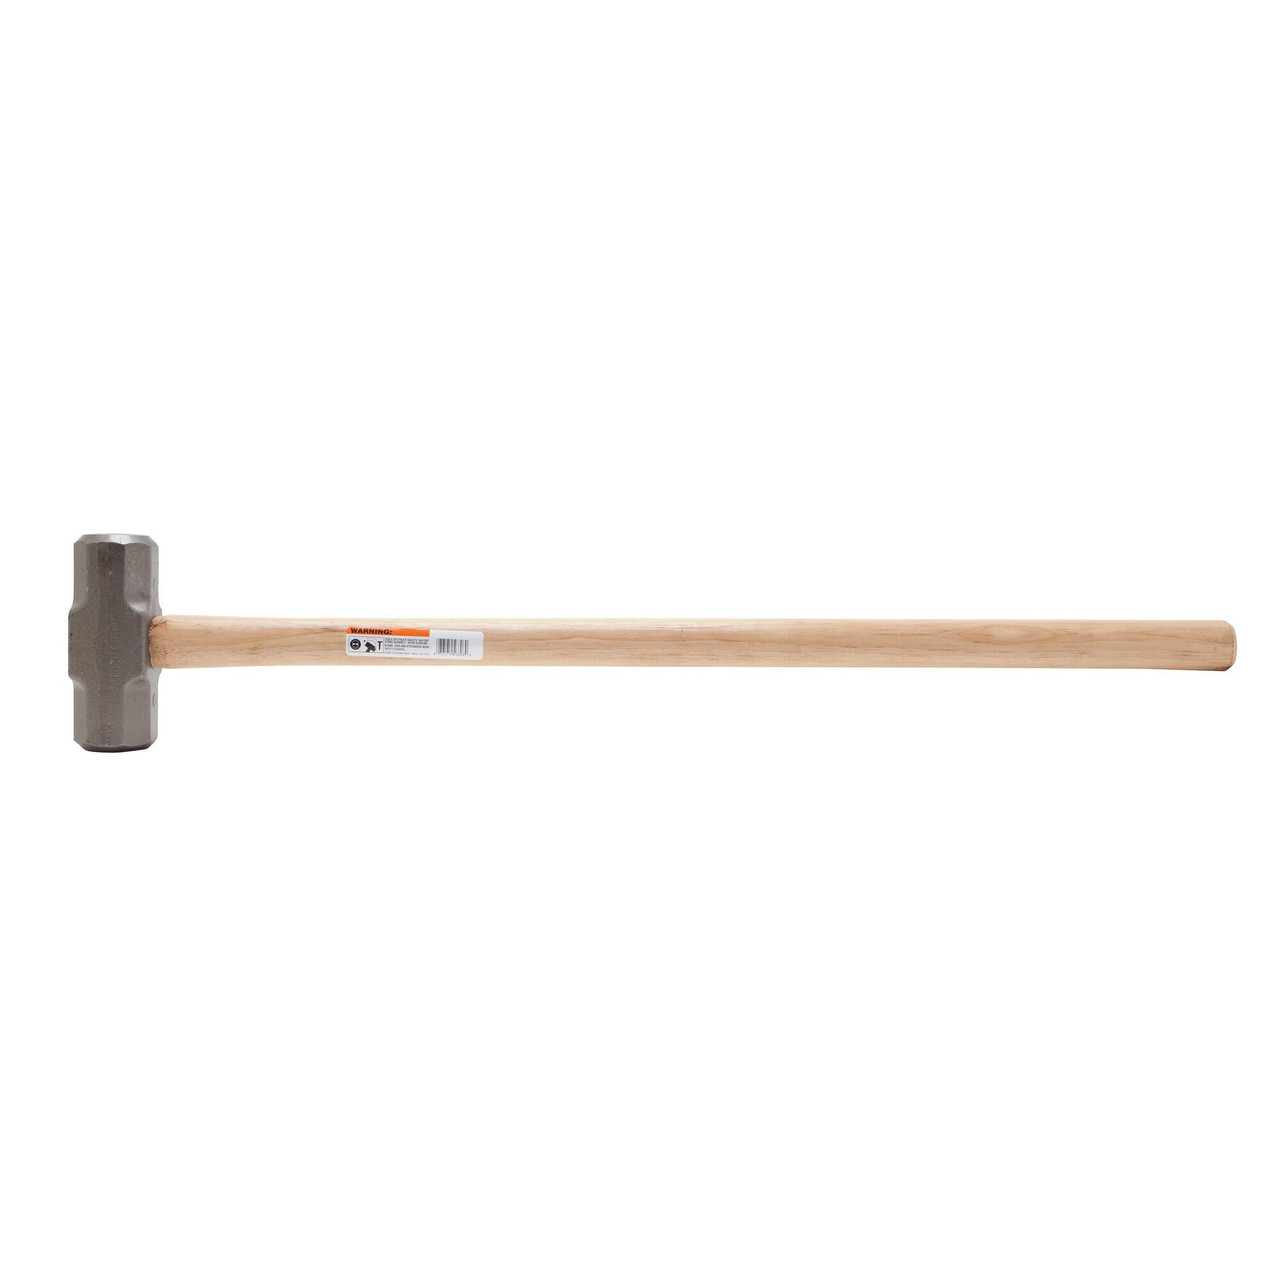 Stanley Products Hickory Handle Sledge Hammers, 8 lb #56-808 (4/Pkg.)